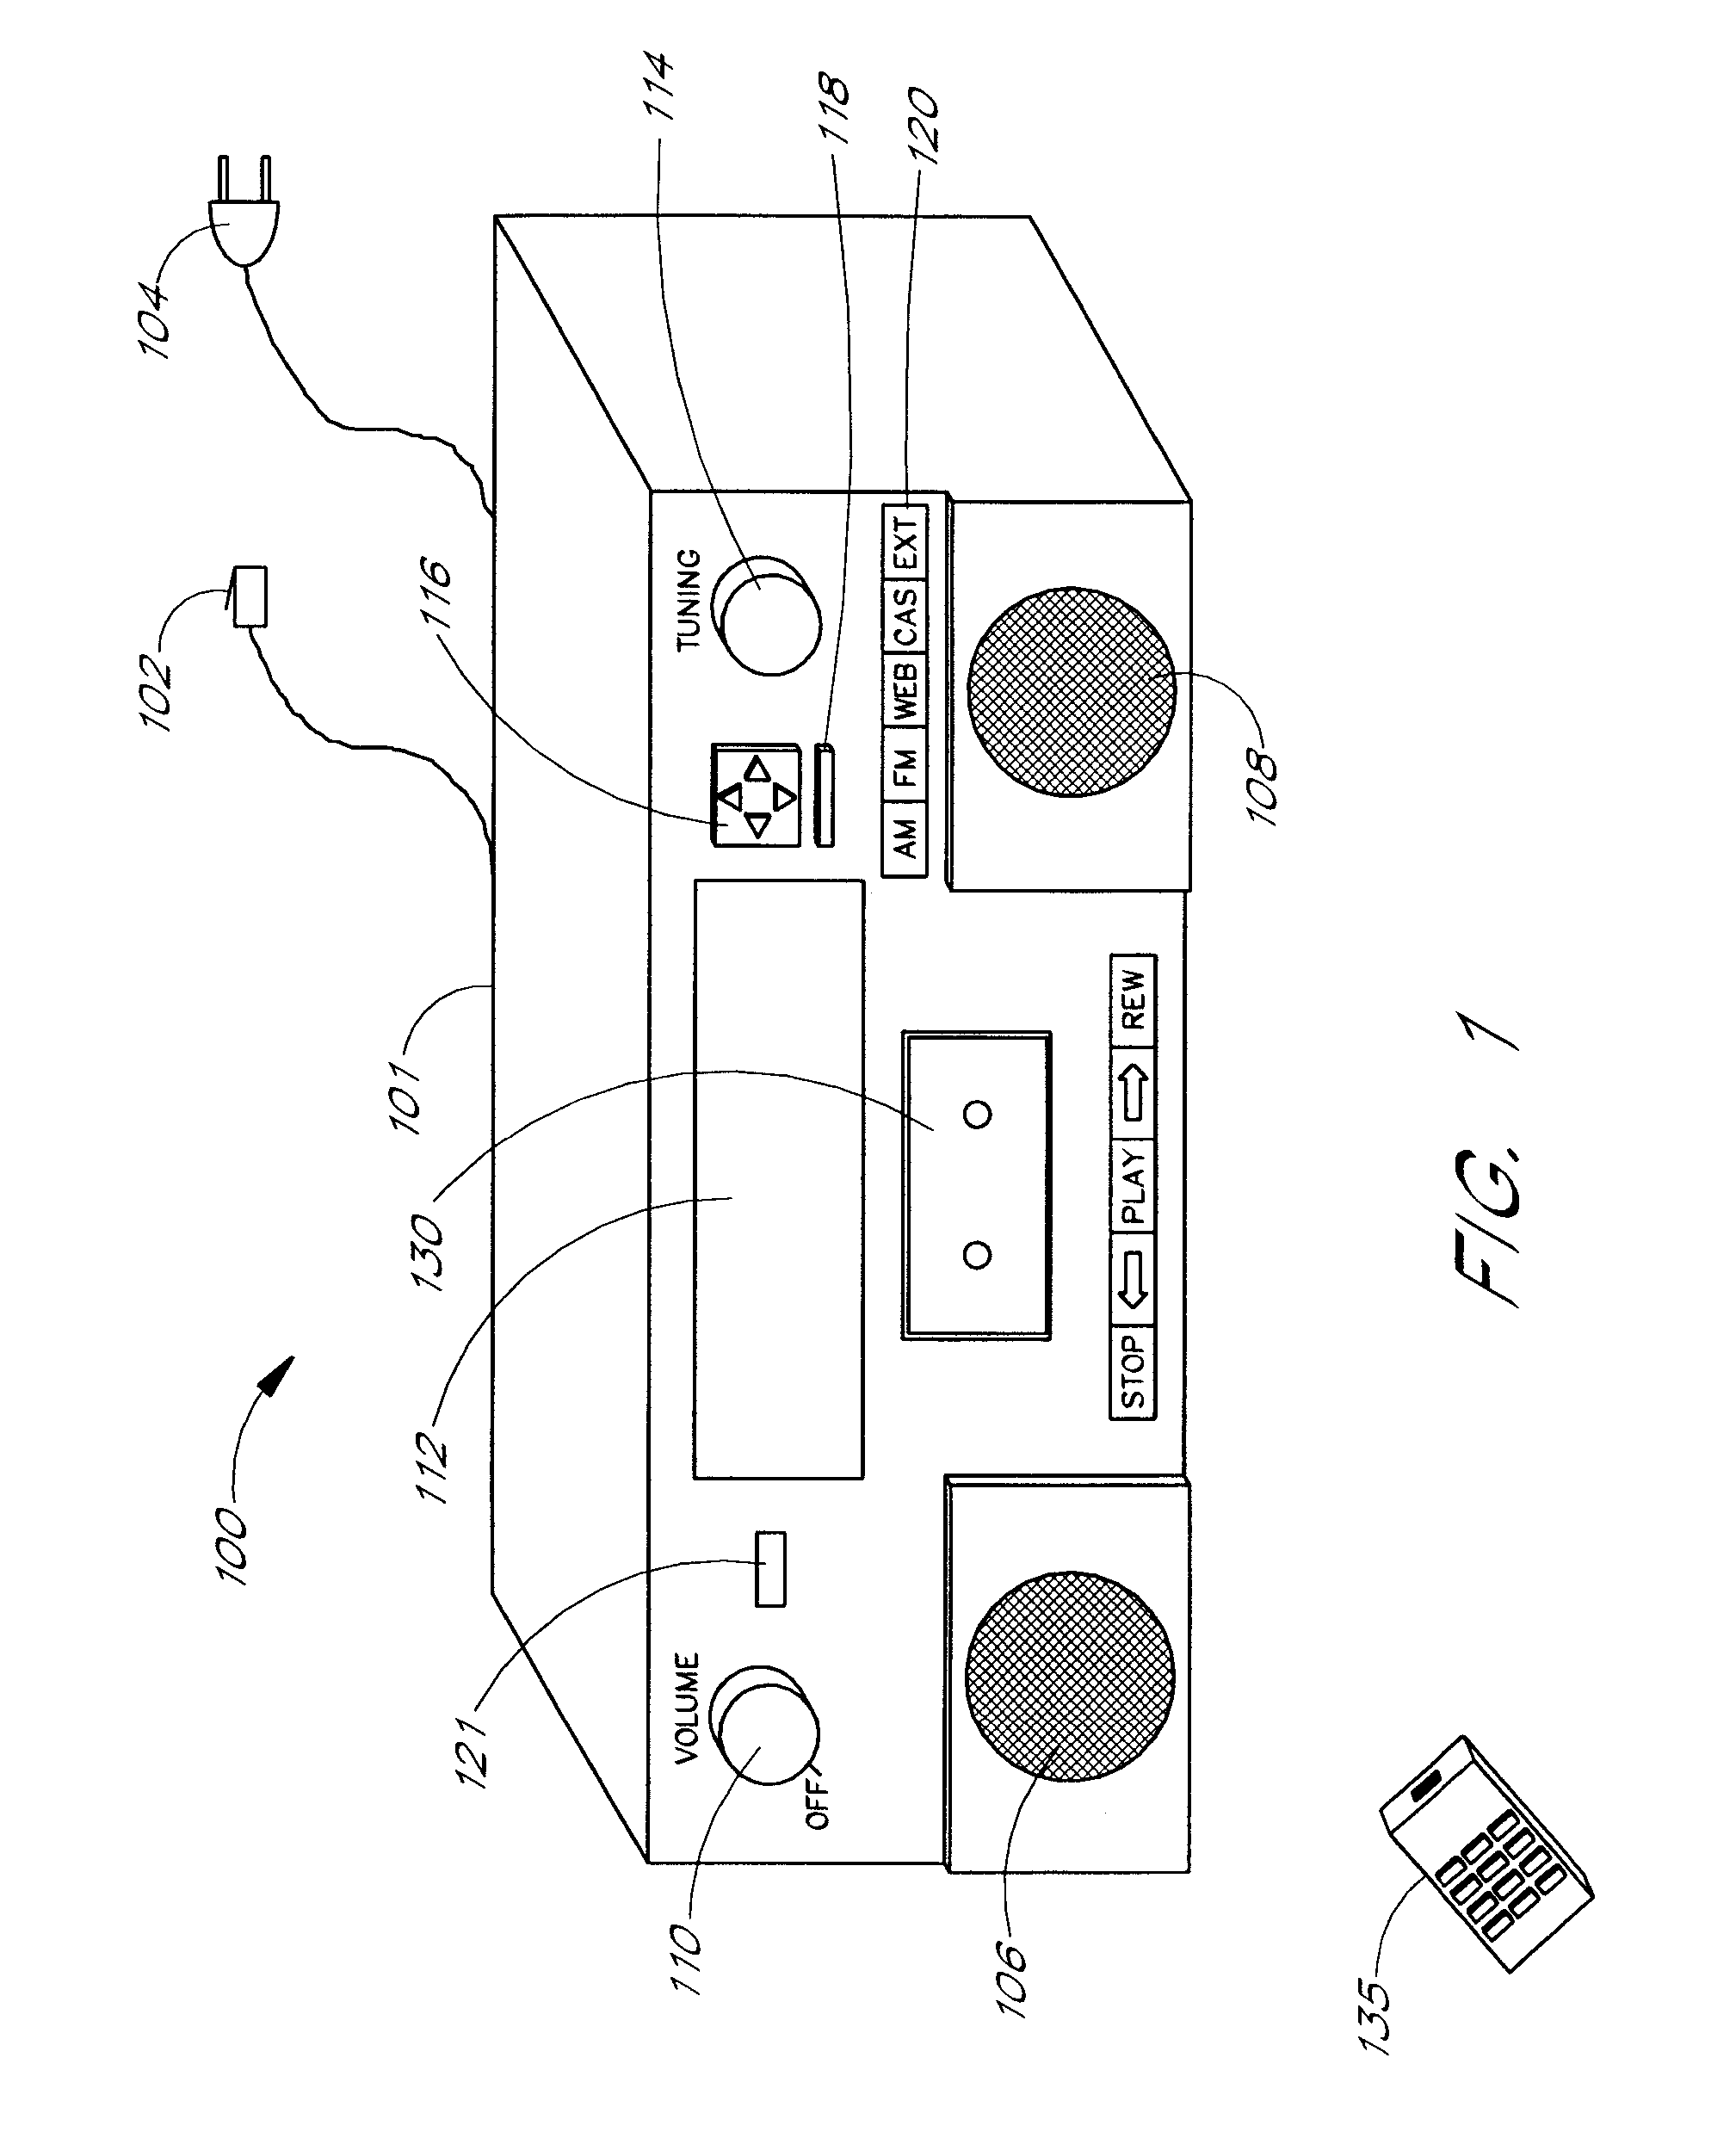 Network-enabled audio device